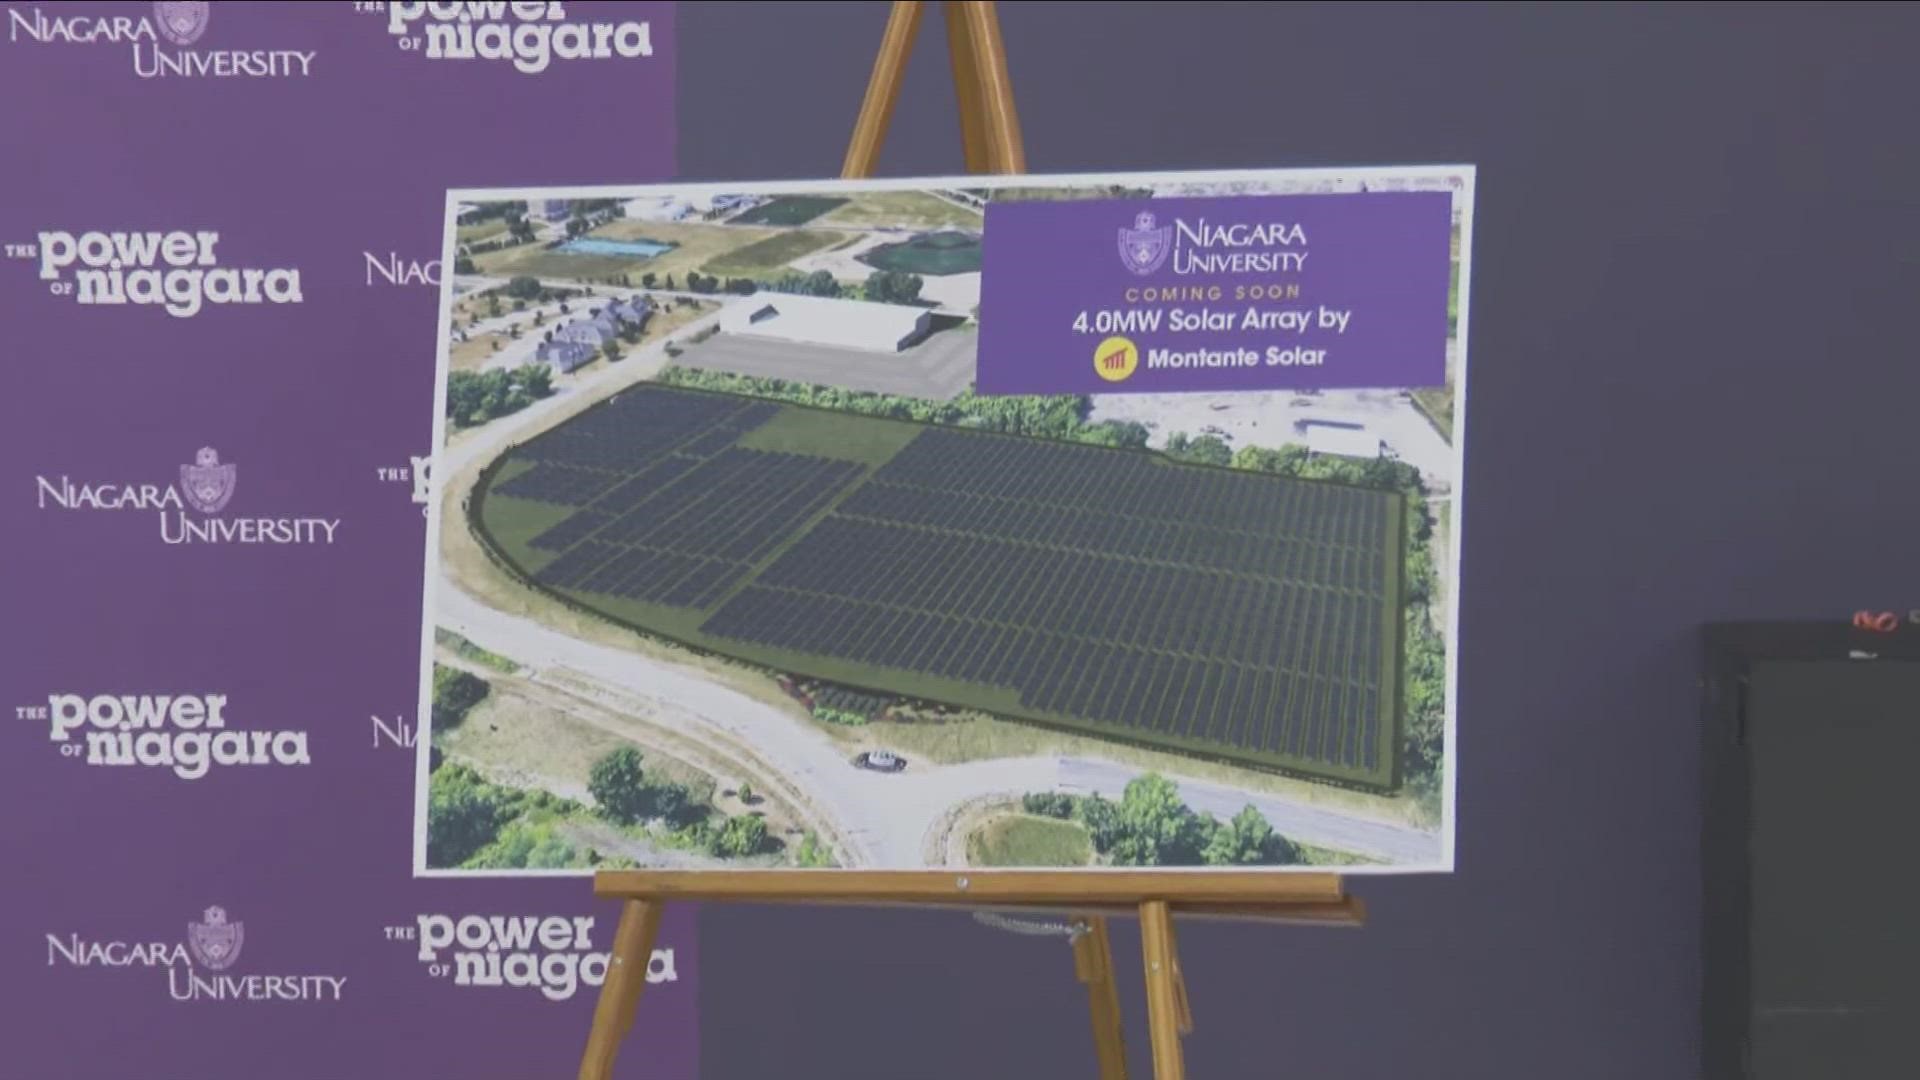 The University is partnering with Montante Solar to develop and maintain the solar array on its Lewiston campus.